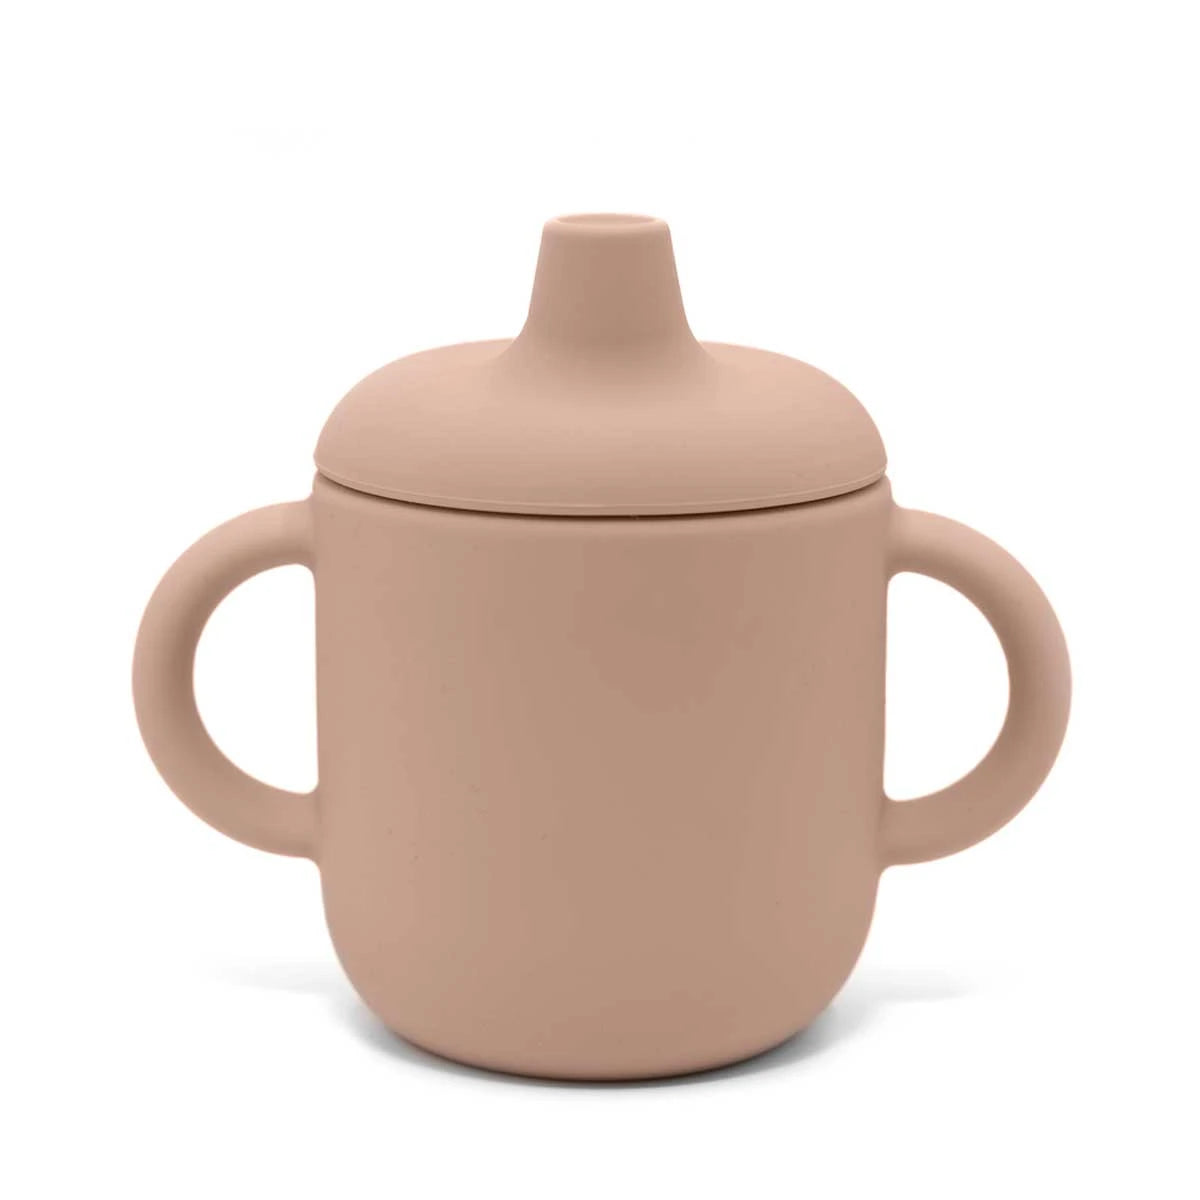 Noüka Non-Spill Sippy Cup - Soft Blush